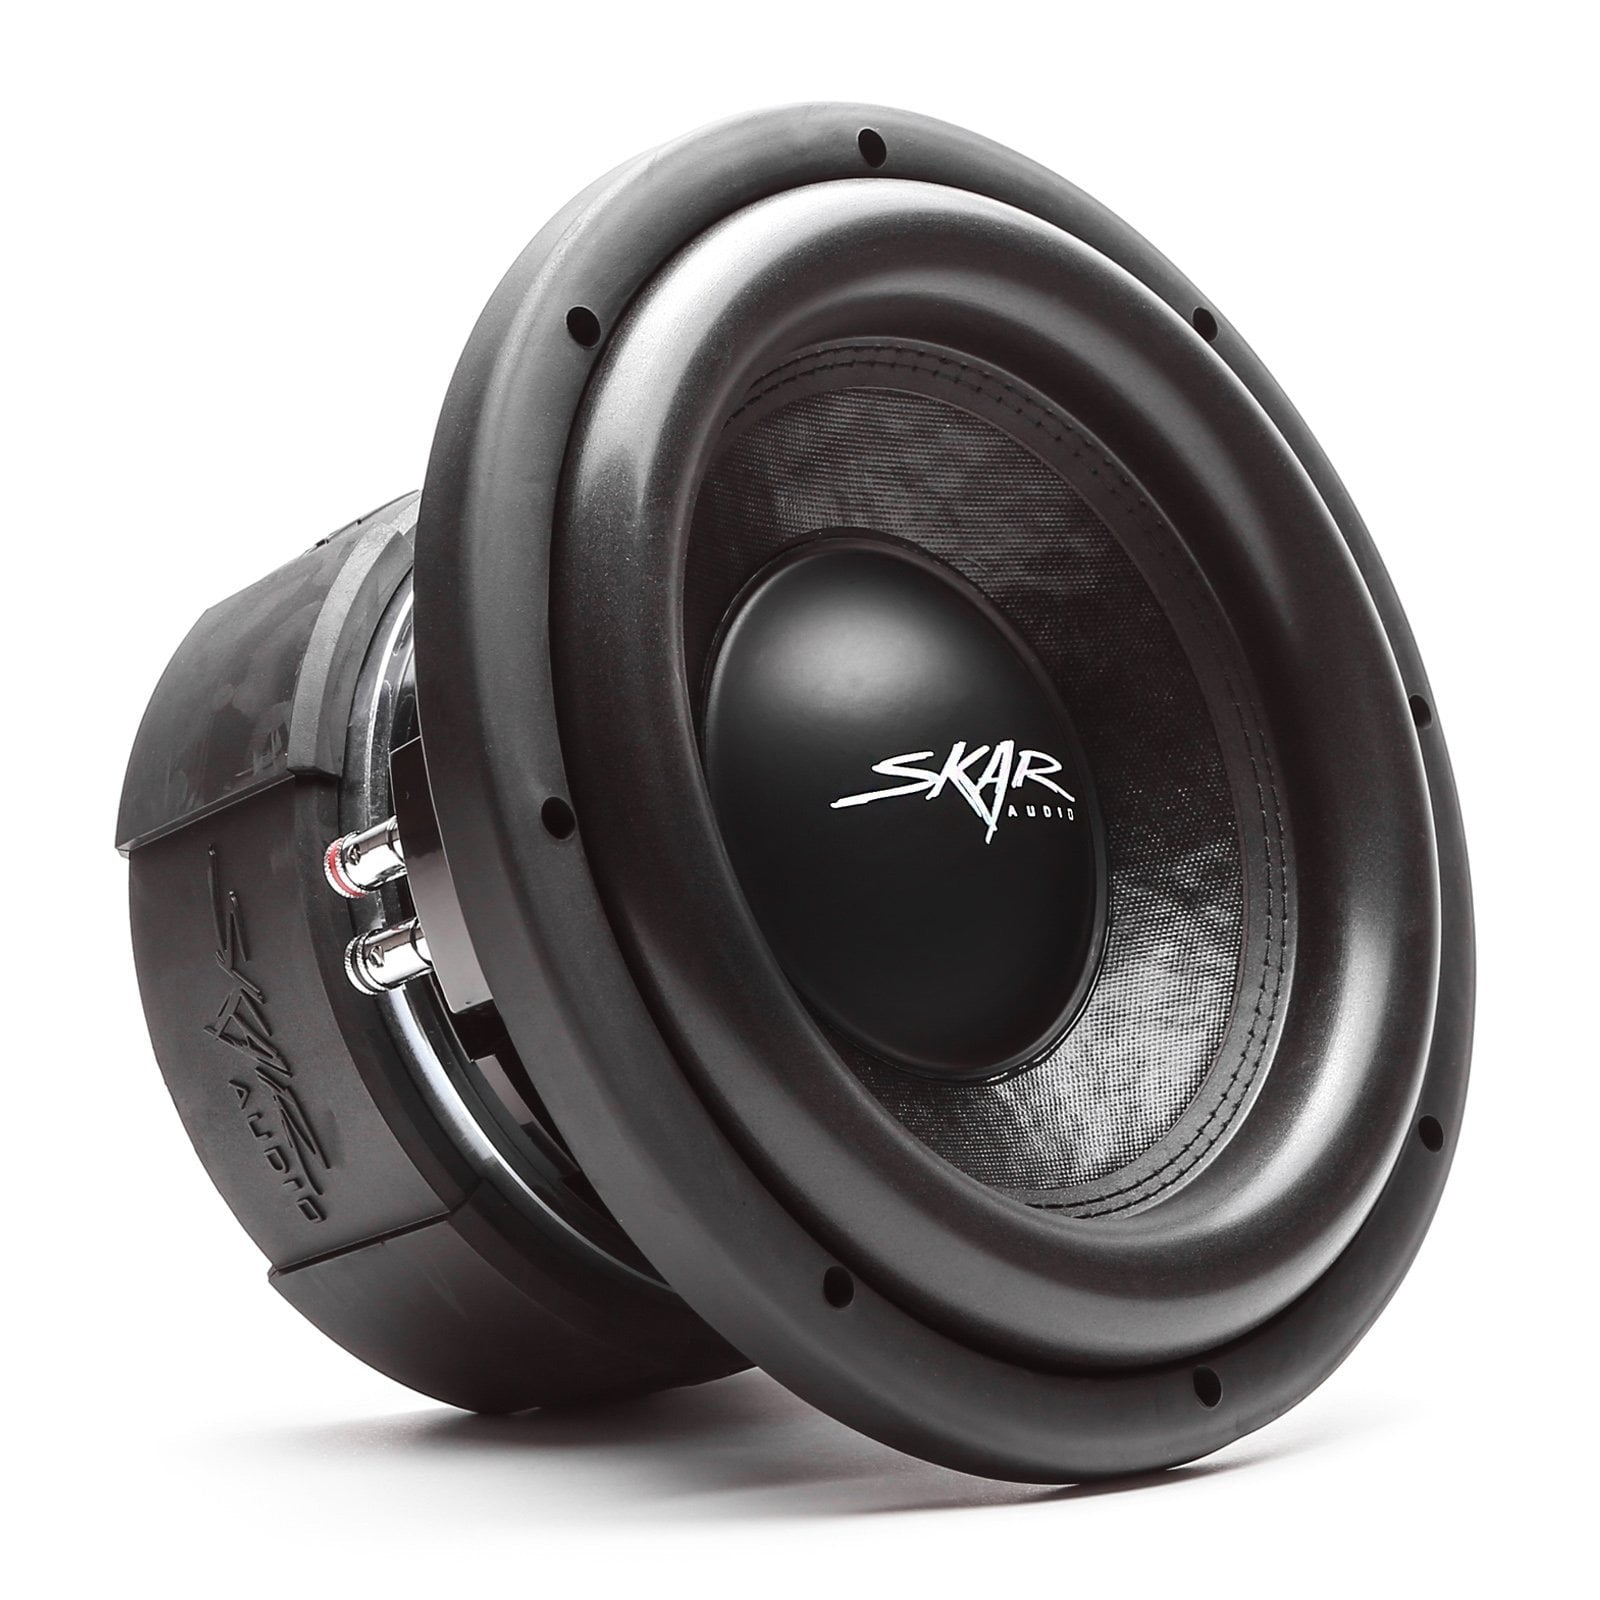 15 inch dual voice coil subwoofer